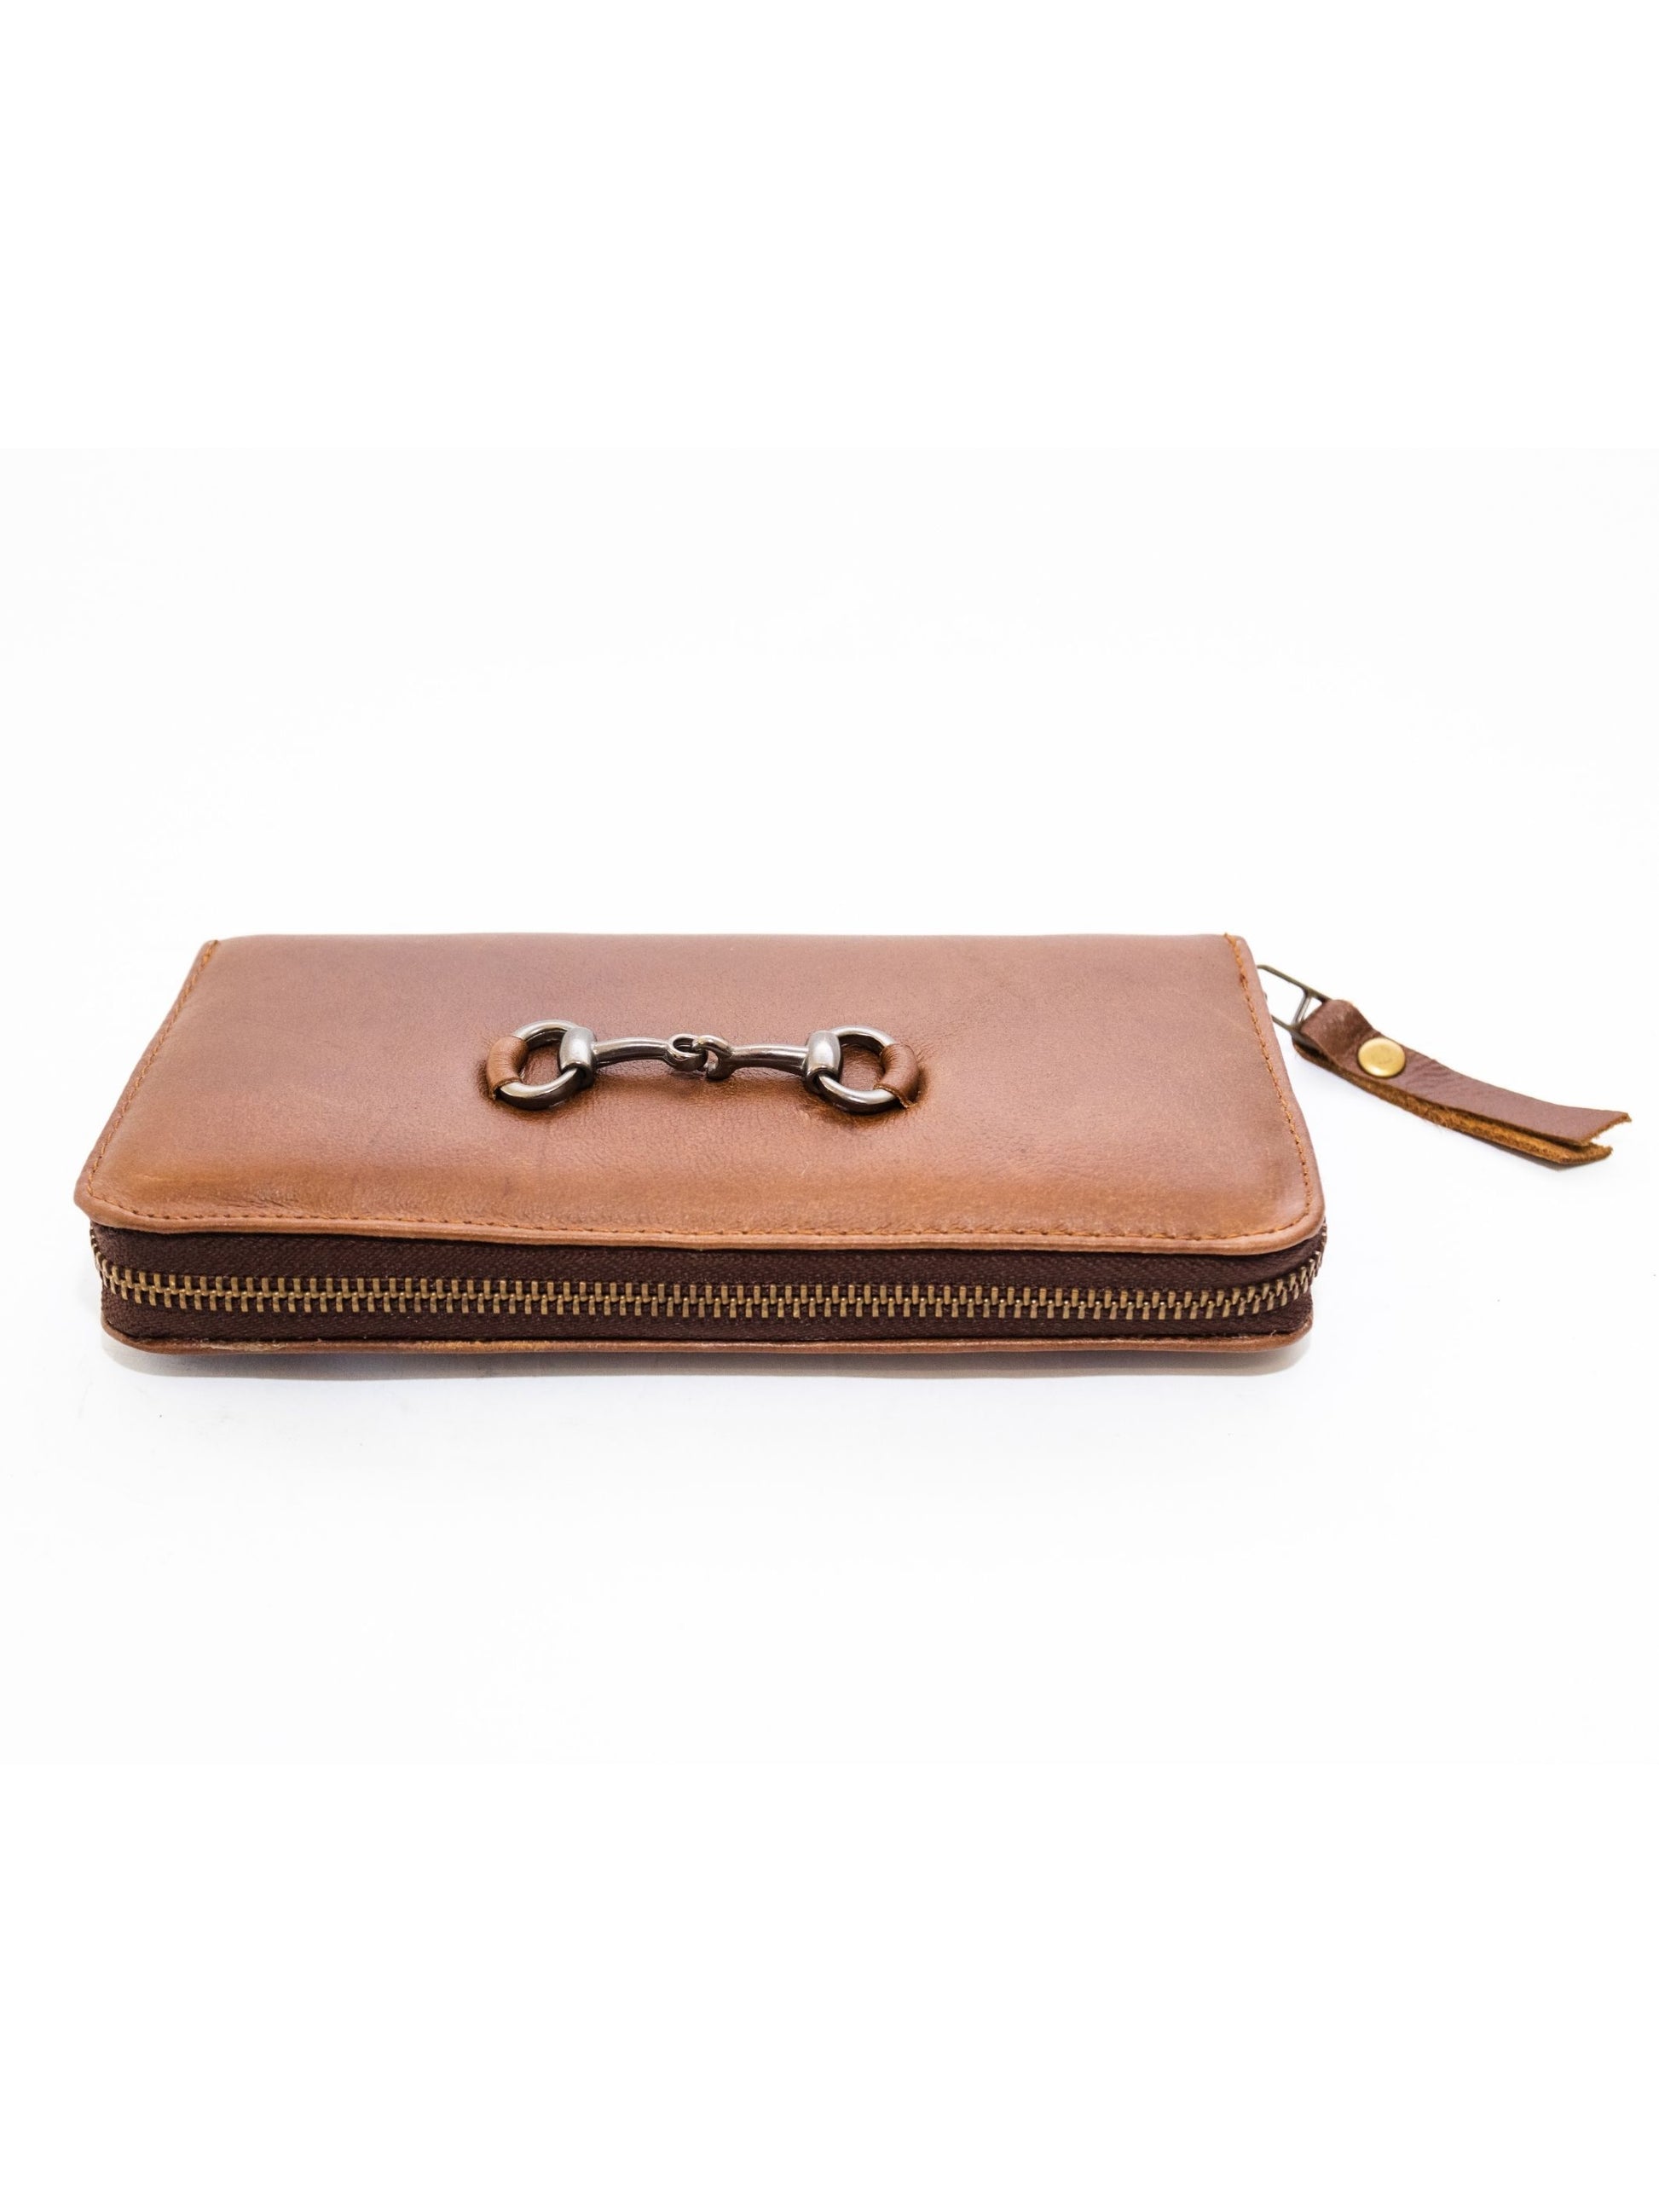 Genuine Leather Ladies Wallet | Hello Quality Equestrian